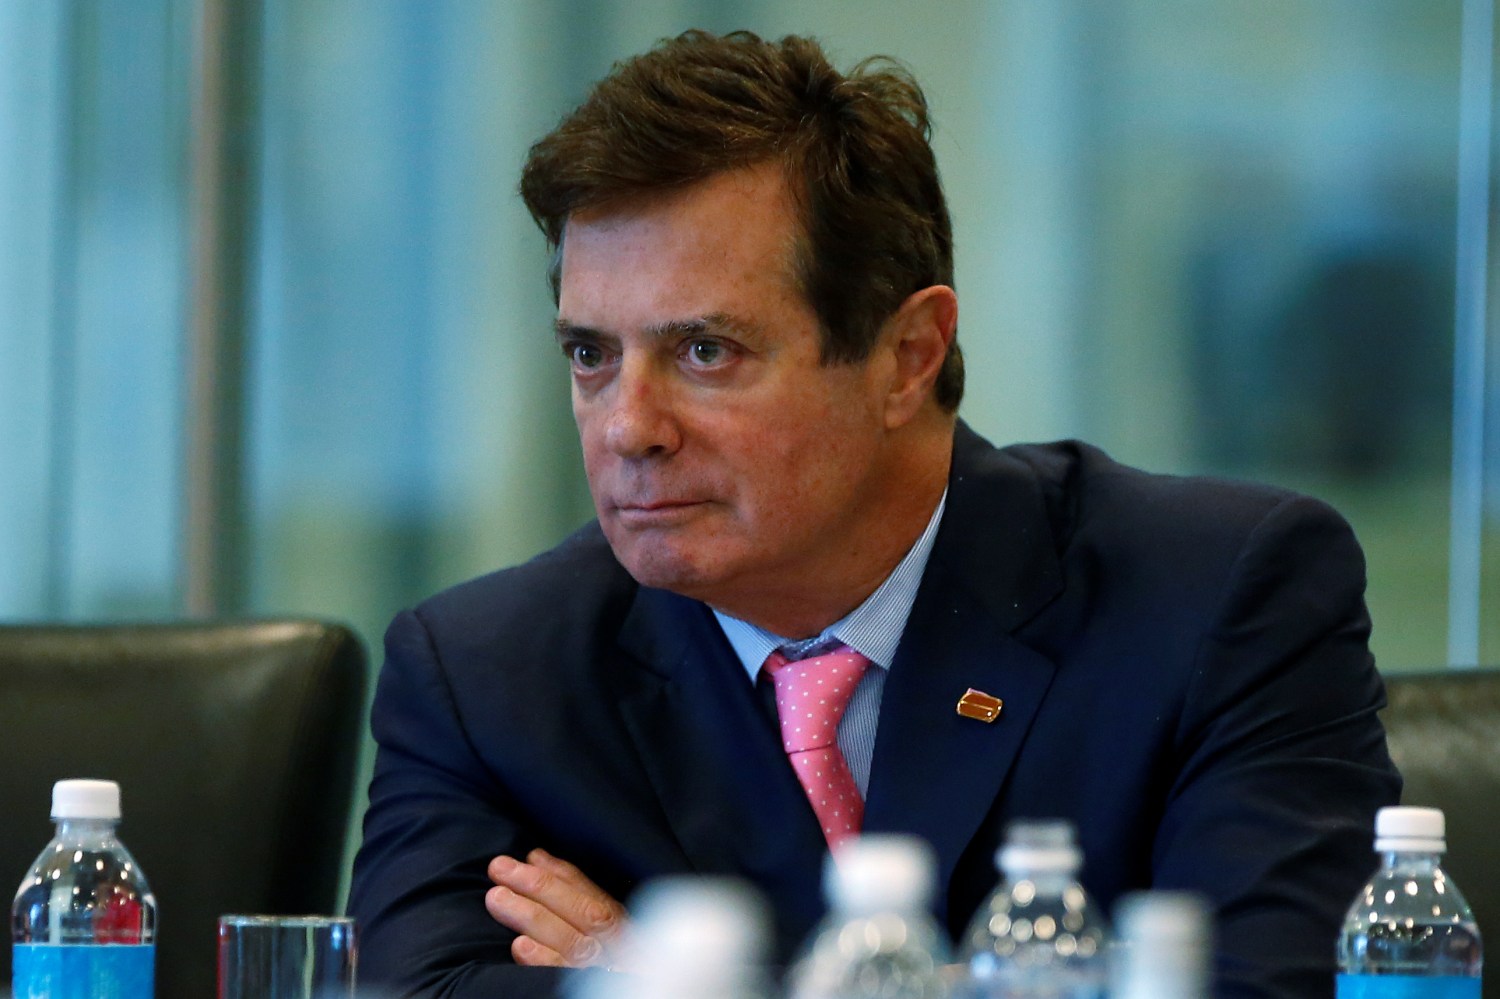 Paul Manafort of Republican presidential nominee Donald Trump's staff listens during a round table discussion on security at Trump Tower in the Manhattan borough of New York, U.S., August 17, 2016. Picture taken August 17, 2016. REUTERS/Carlo Allegri - S1AETWIWWYAA